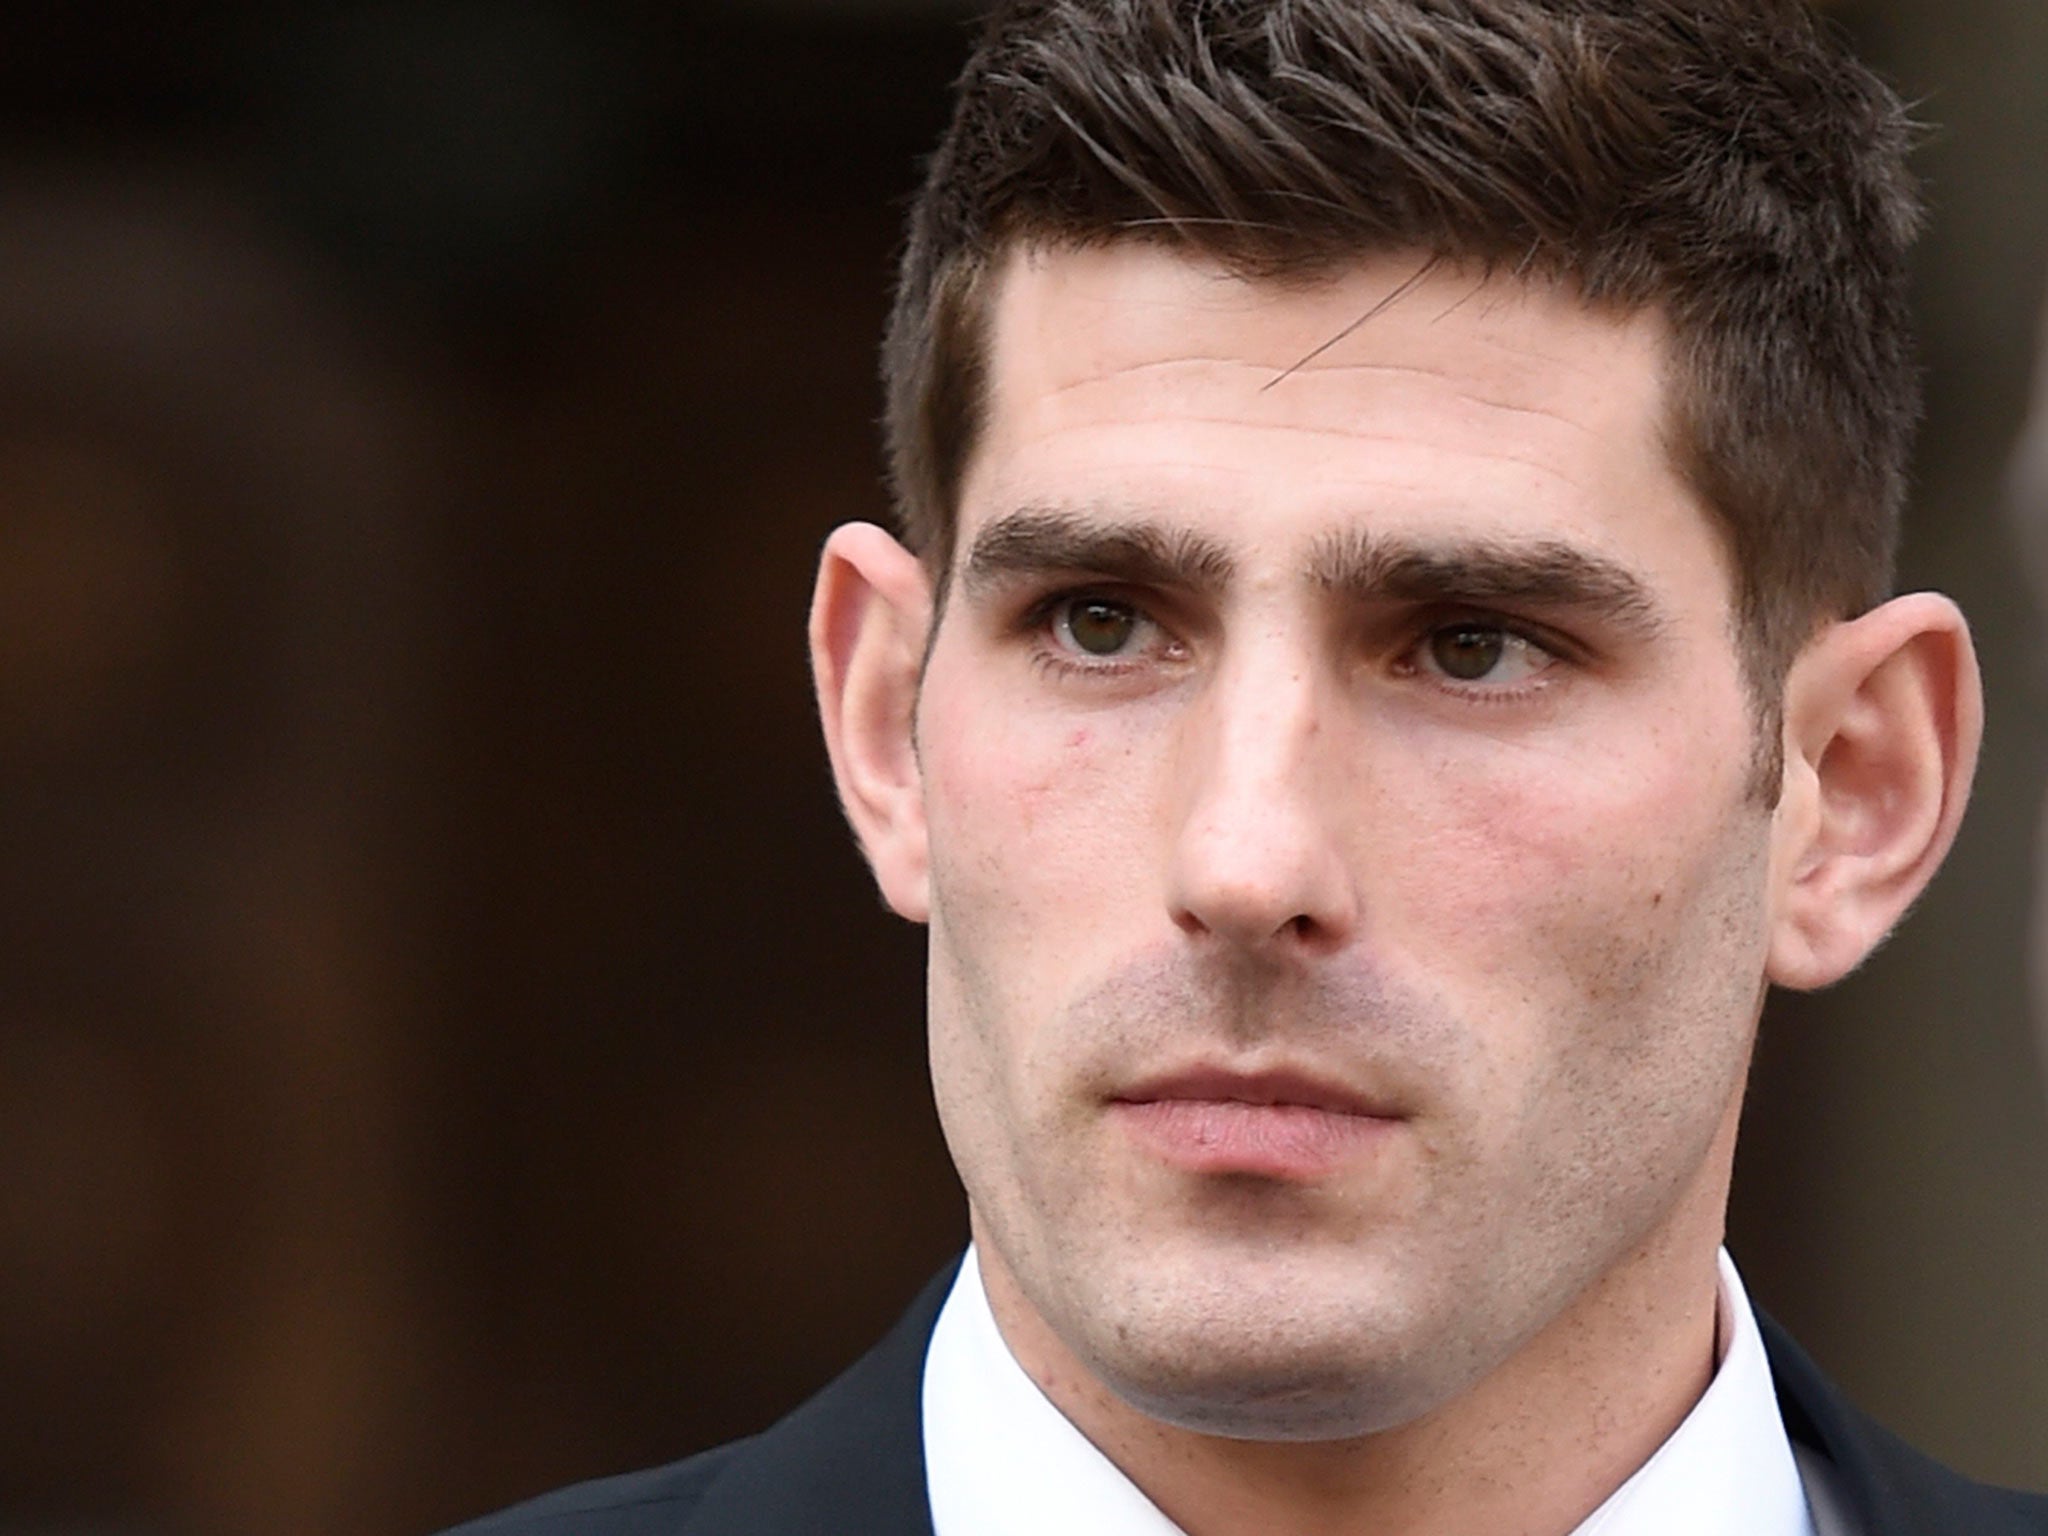 Ched Evans will find out next week if he has won a challenge against his conviction for raping a 19-year-old woman